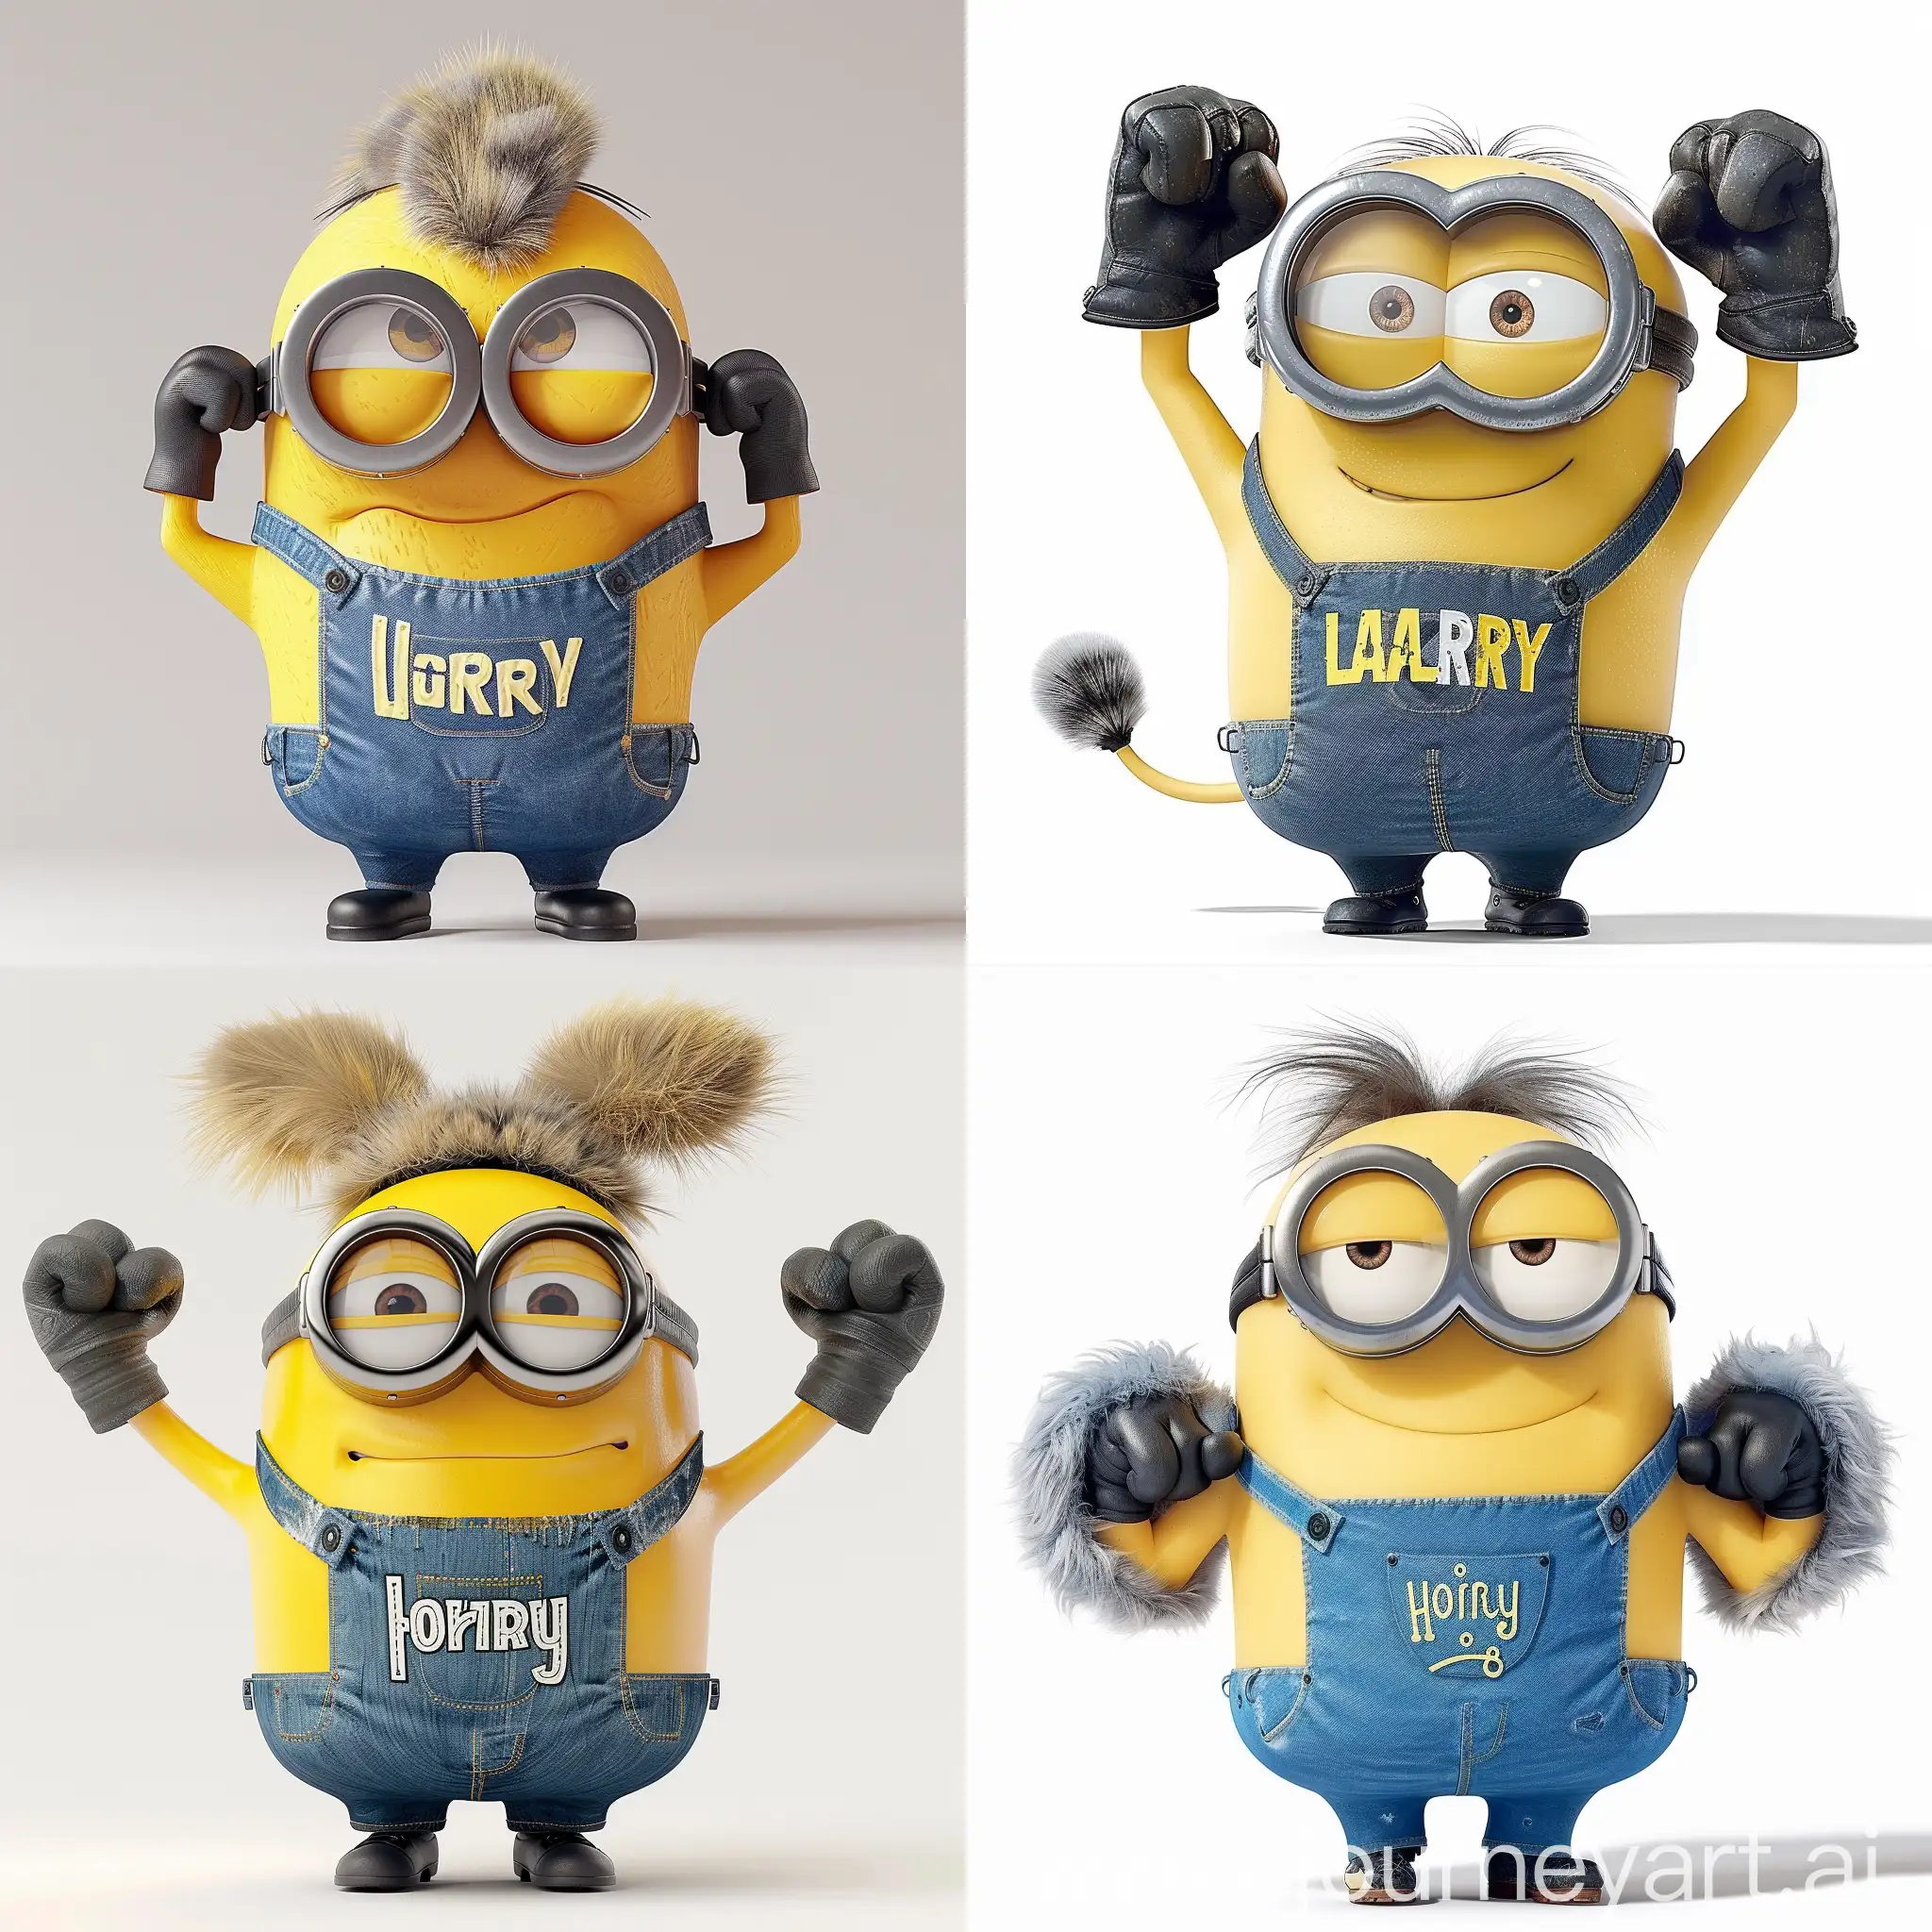 Ultra strong minion with the inscription "furry" on a T-shirt